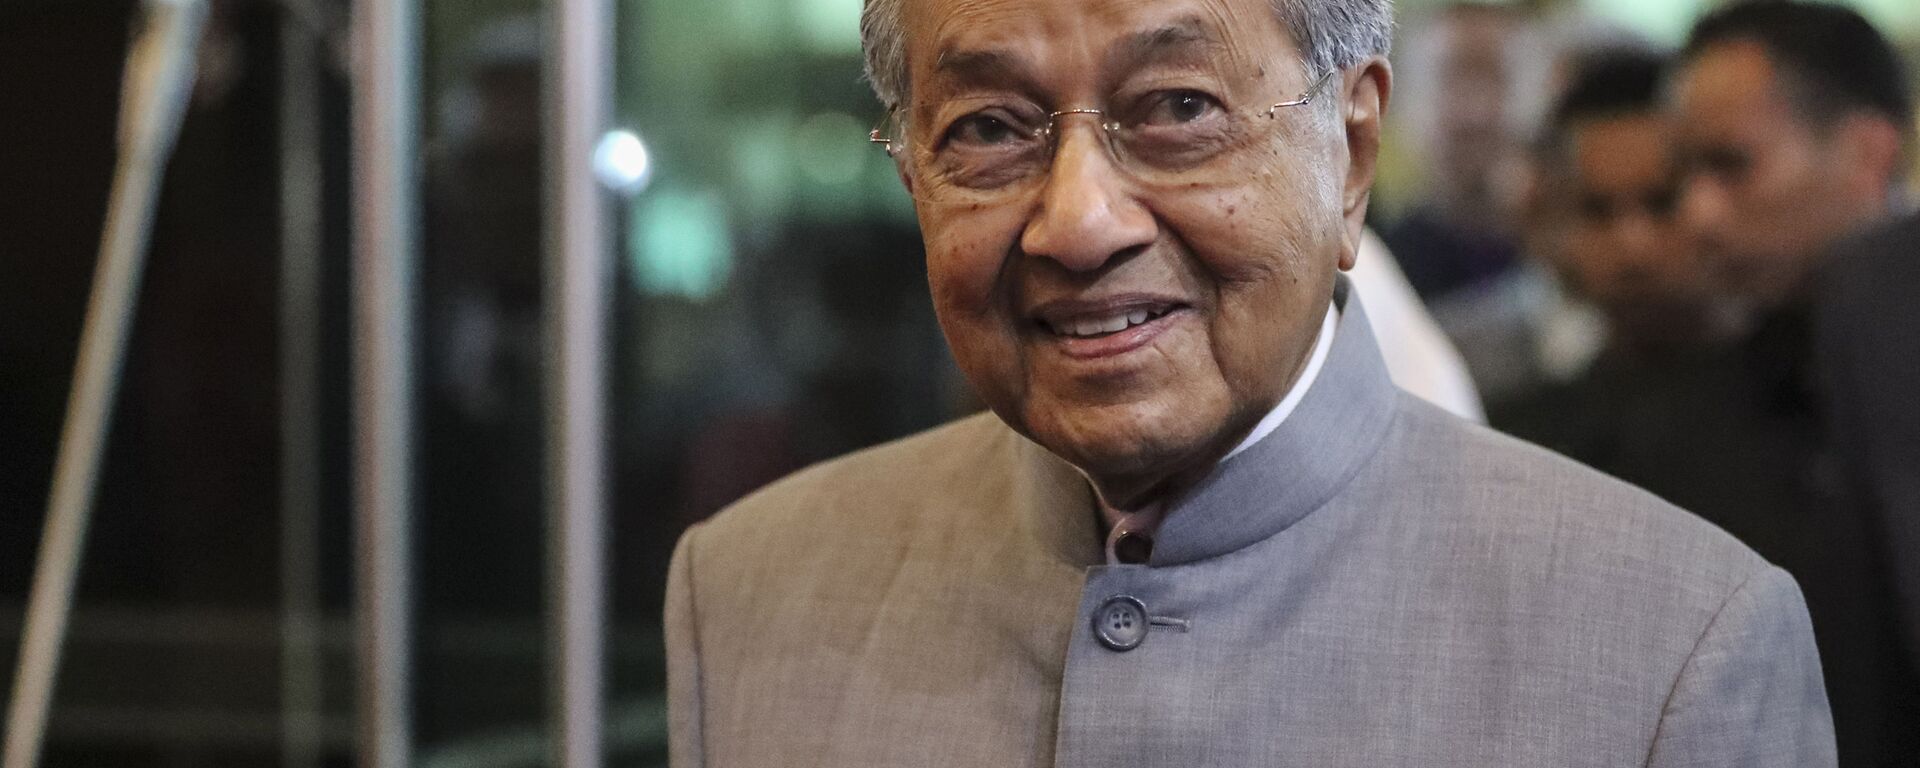 Malaysian Prime Minister Mahathir Mohamad arrives upon delivering a televised speech to the nation in conjunction with the coalition's first anniversary in power in Putrajaya, Malaysia, Thursday, May 9, 2019 - Sputnik International, 1920, 24.02.2020